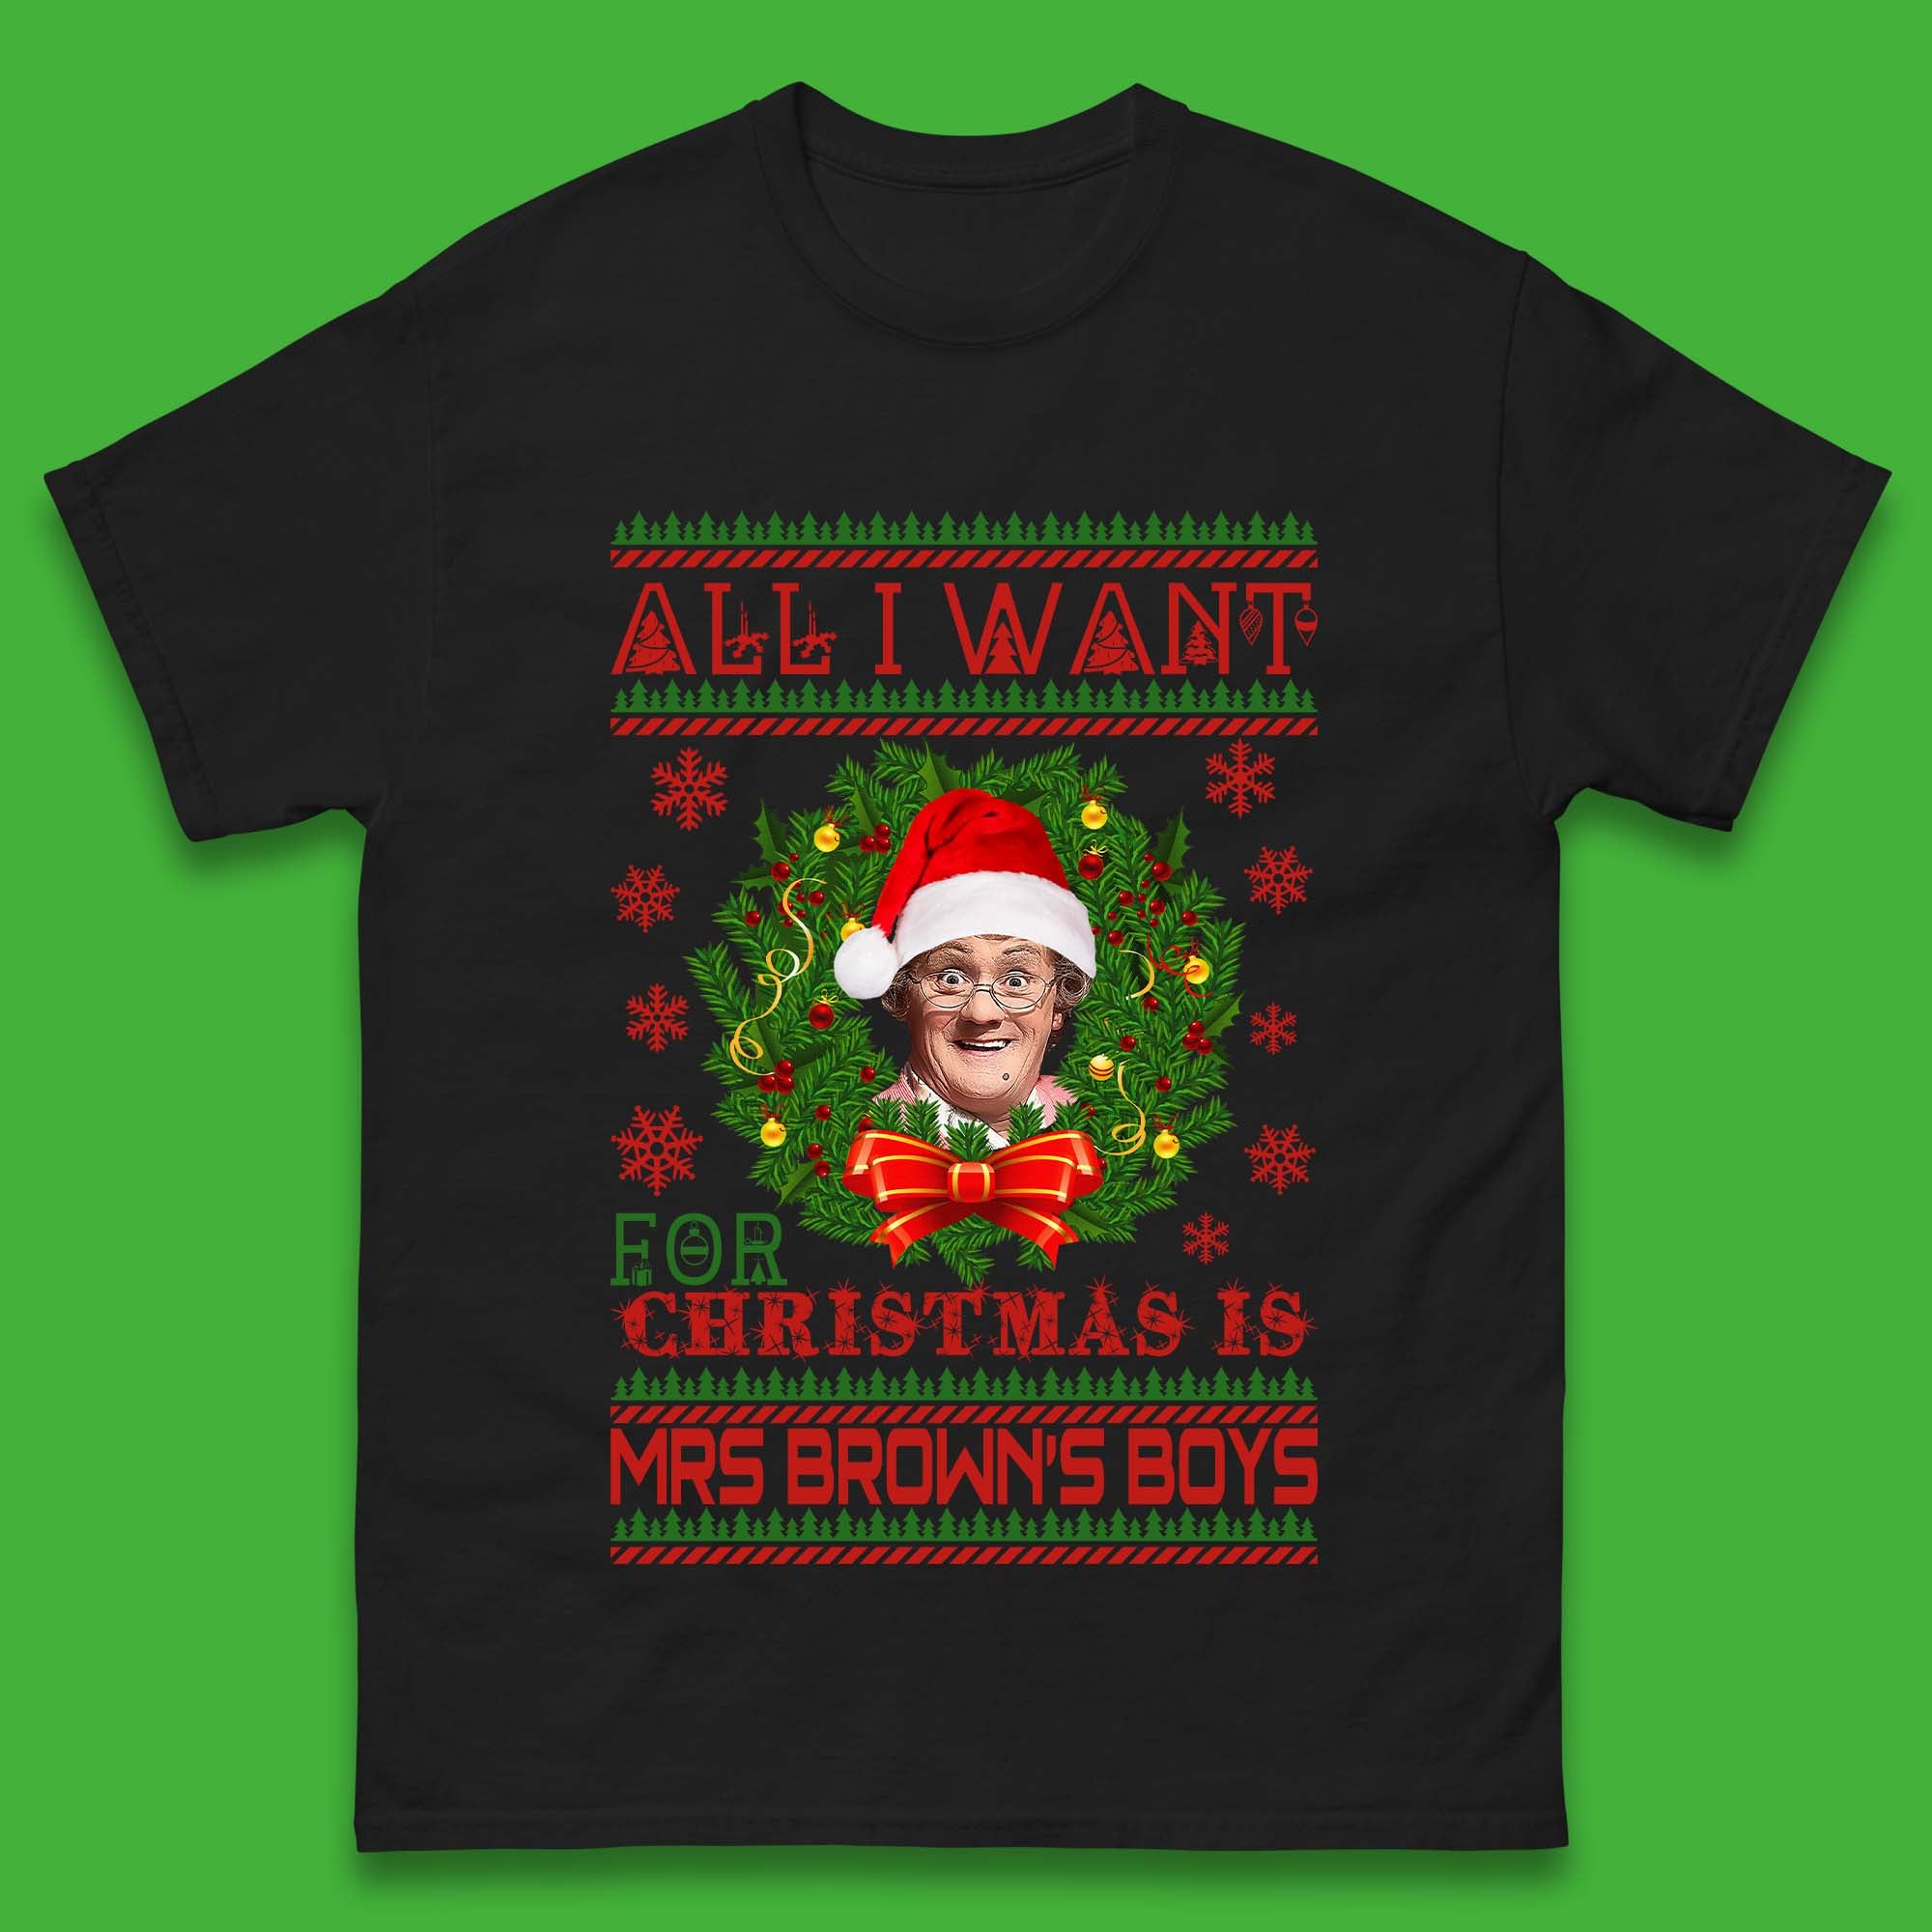 Want Mrs Brown's Boys For Christmas Mens T-Shirt